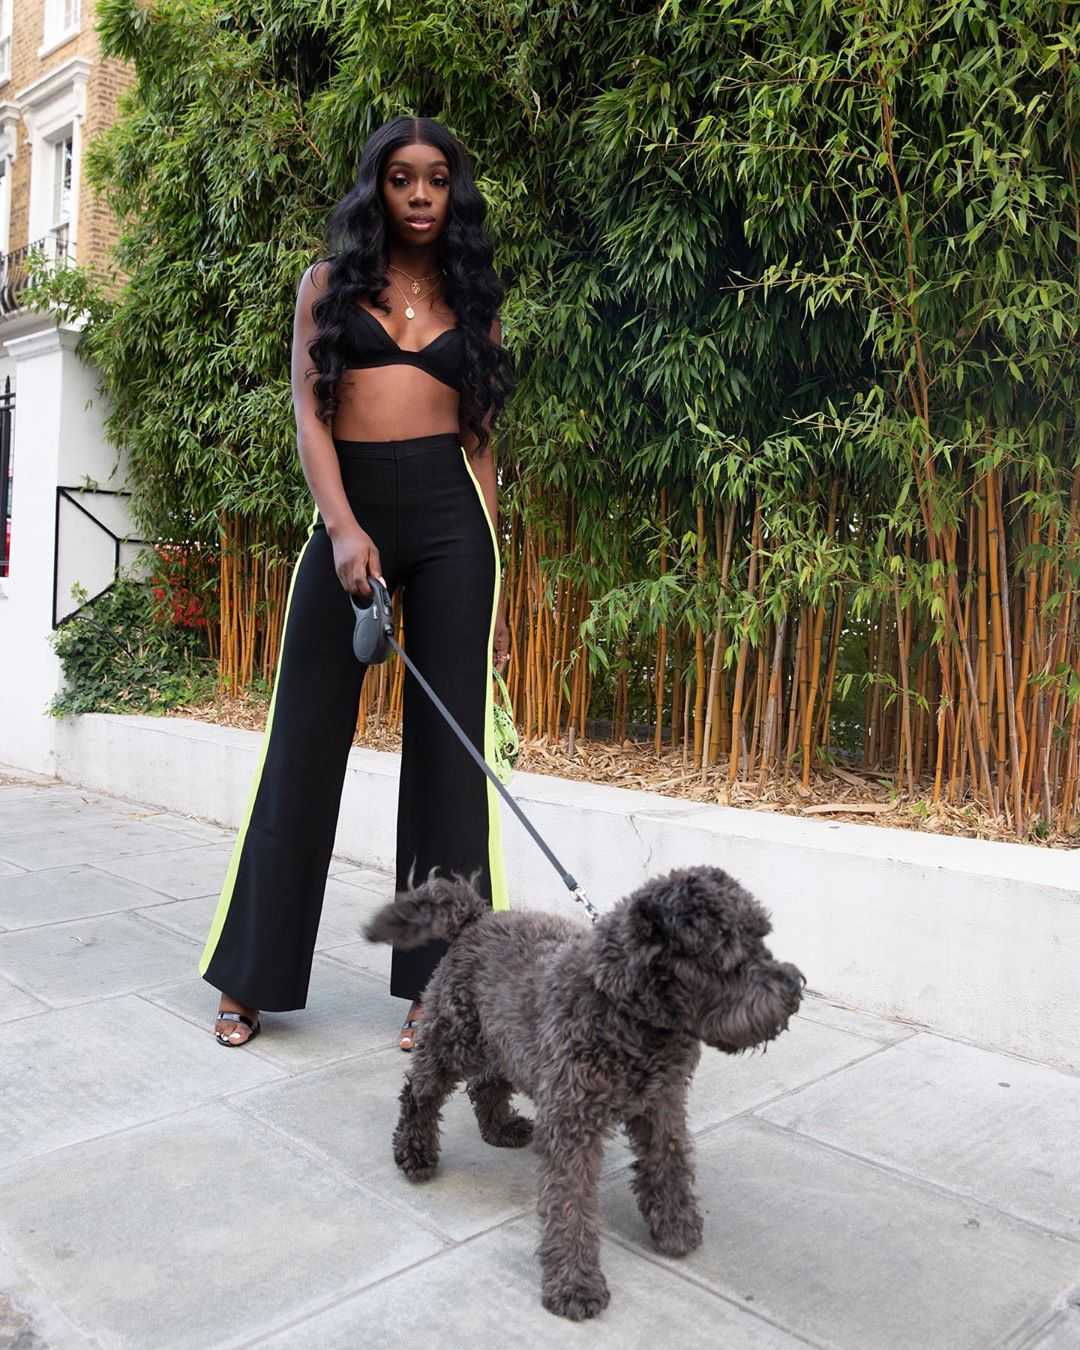 40 Hot Pictures Of Yewande Which Will Leave You To Awe In Astonishment | Best Of Comic Books